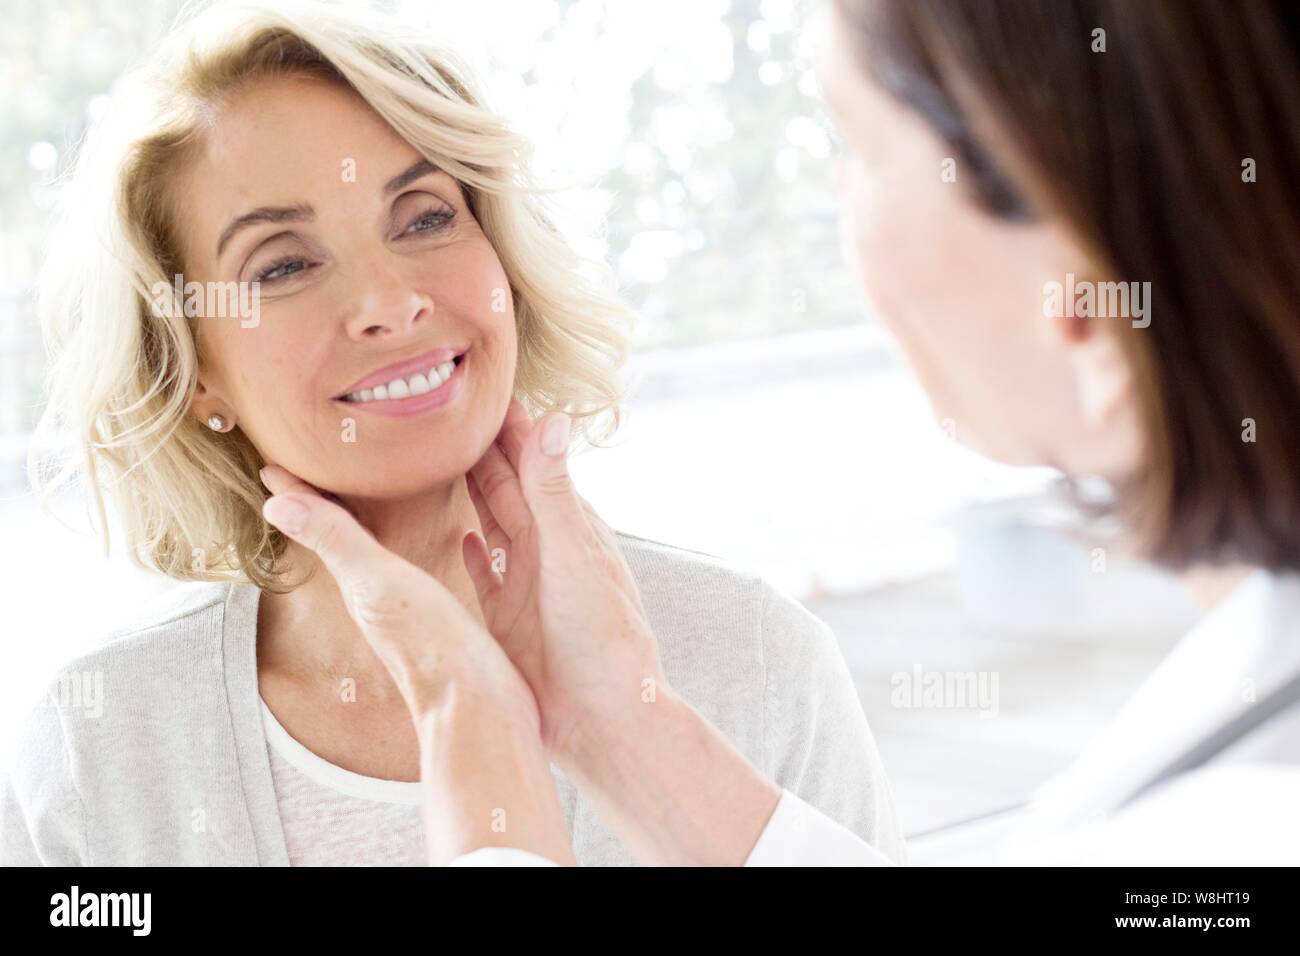 Reife Frau in Check-up in der Arztpraxis. Stockfoto